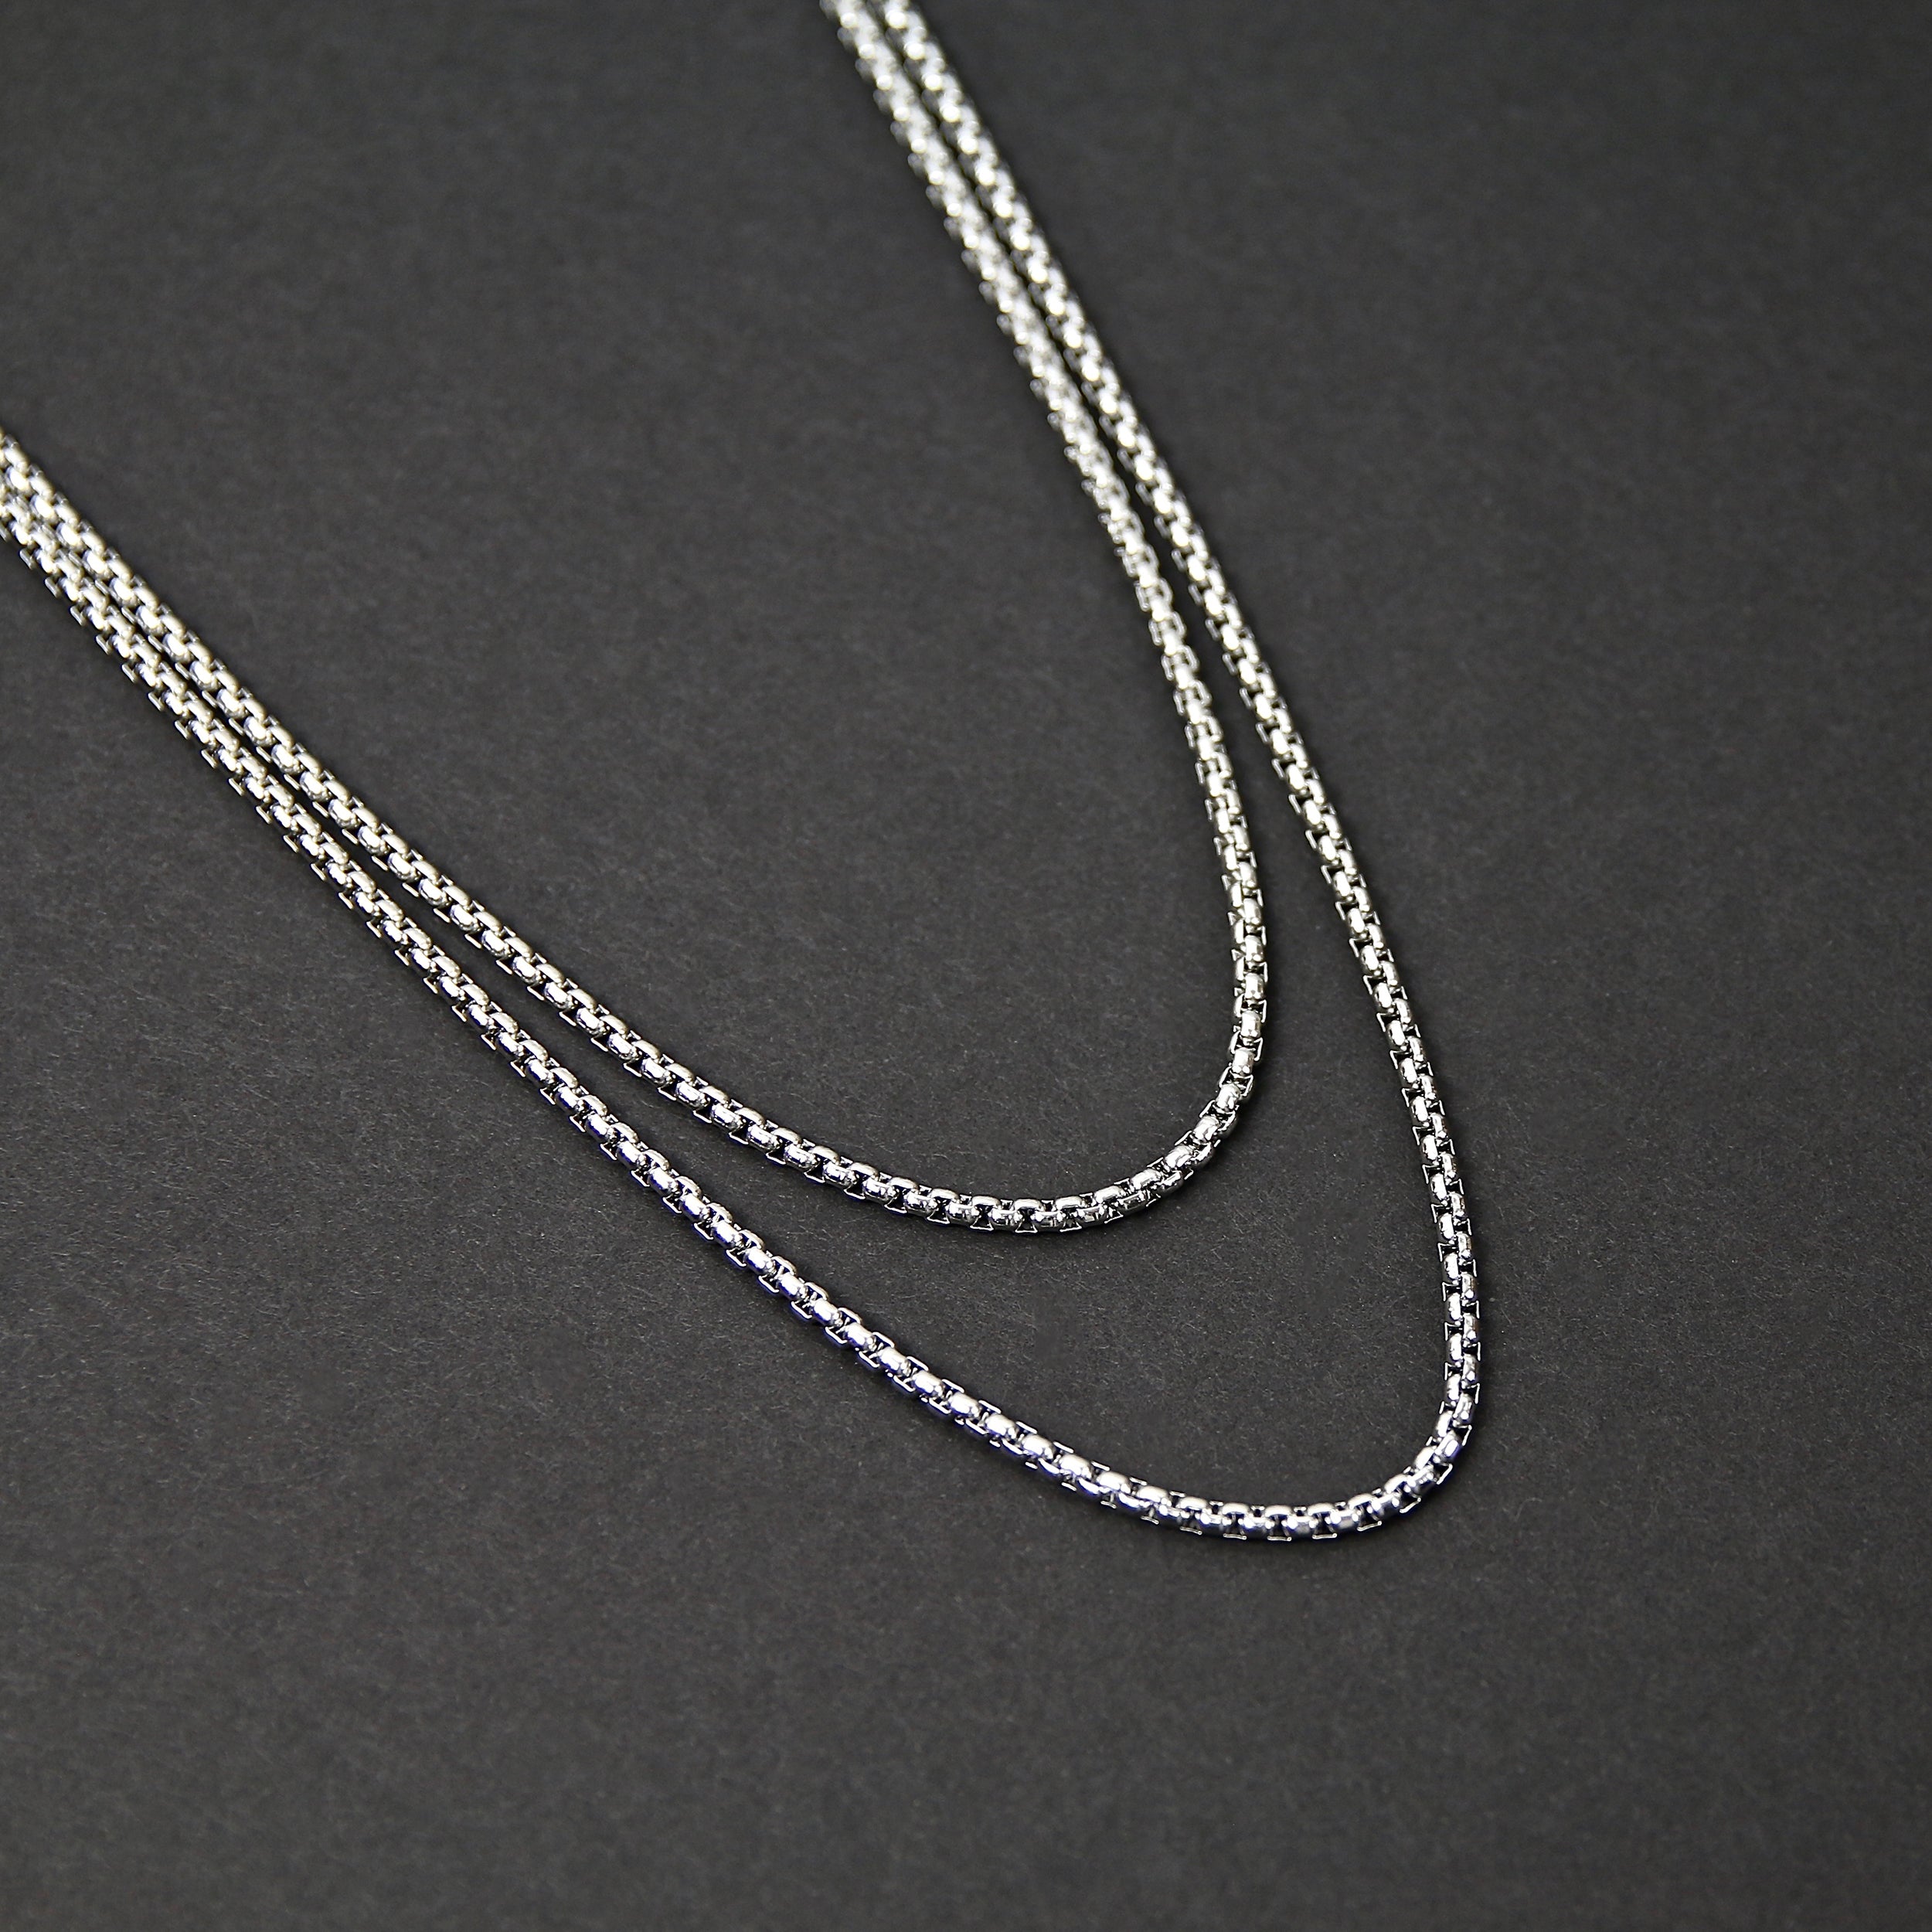 Double Layered Box Chain Necklace - Silver 3mm